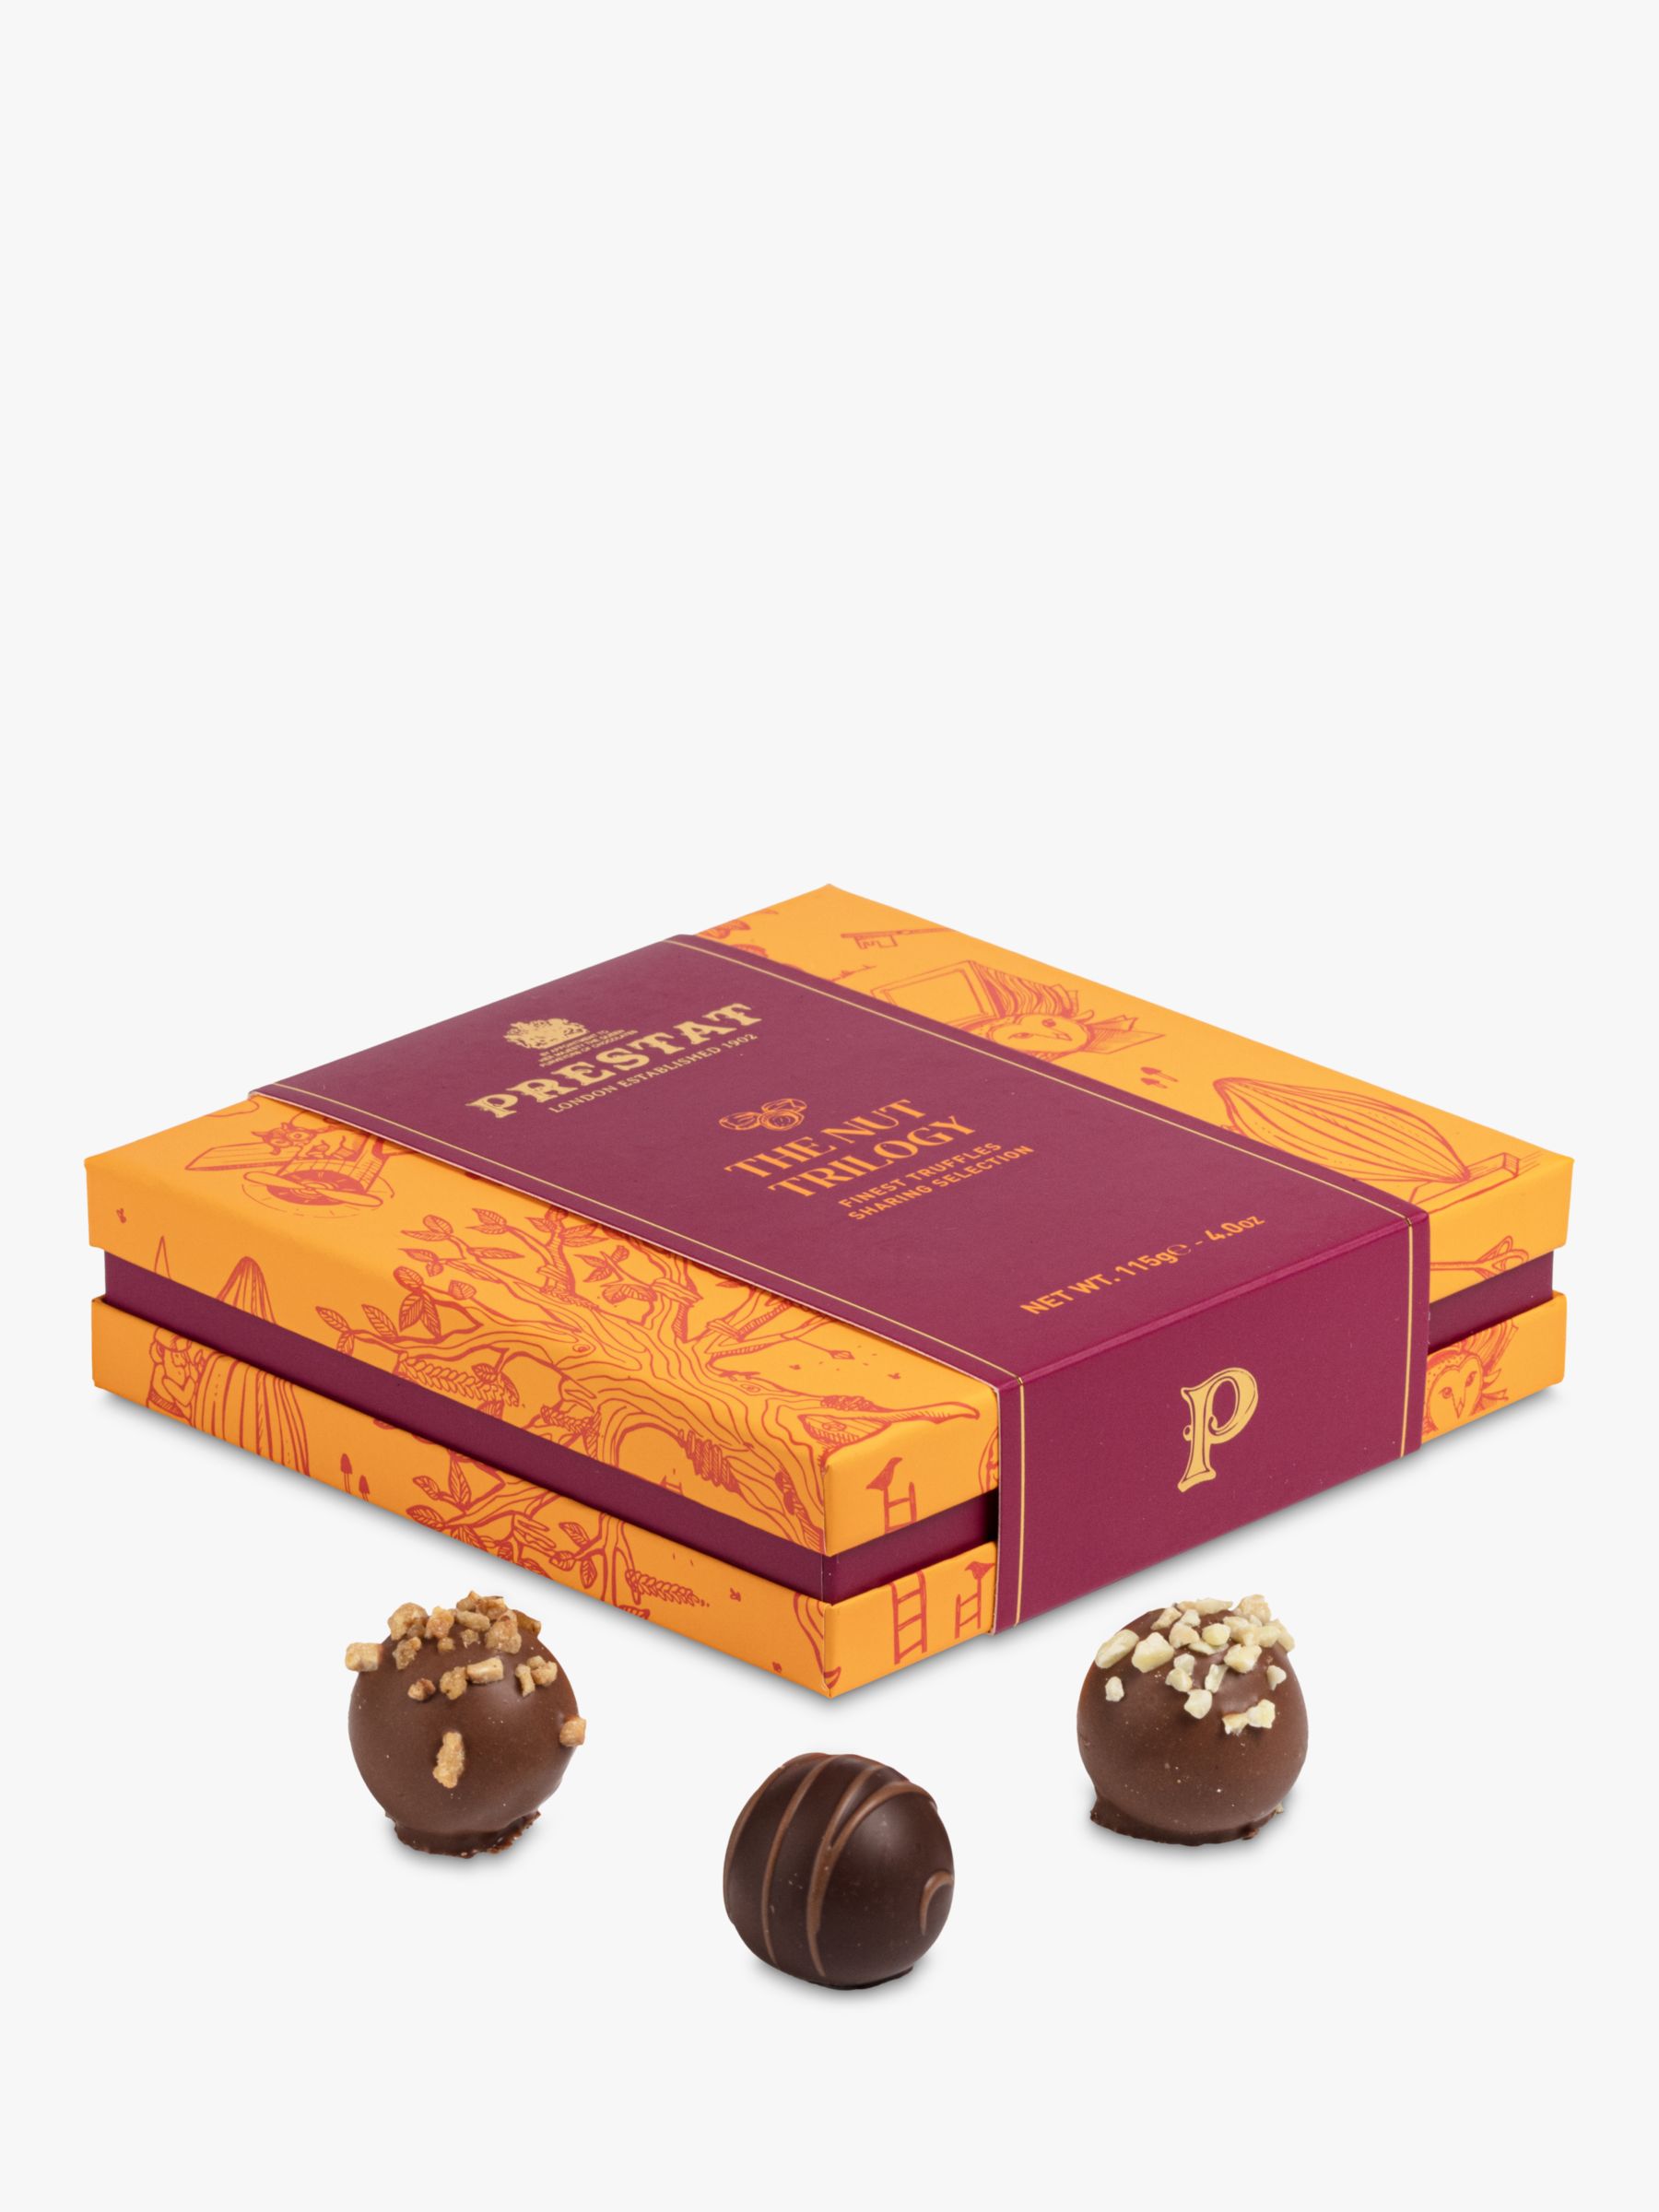 Prestat The Nut Trilogy Sharing Selection Chocolates, 115g